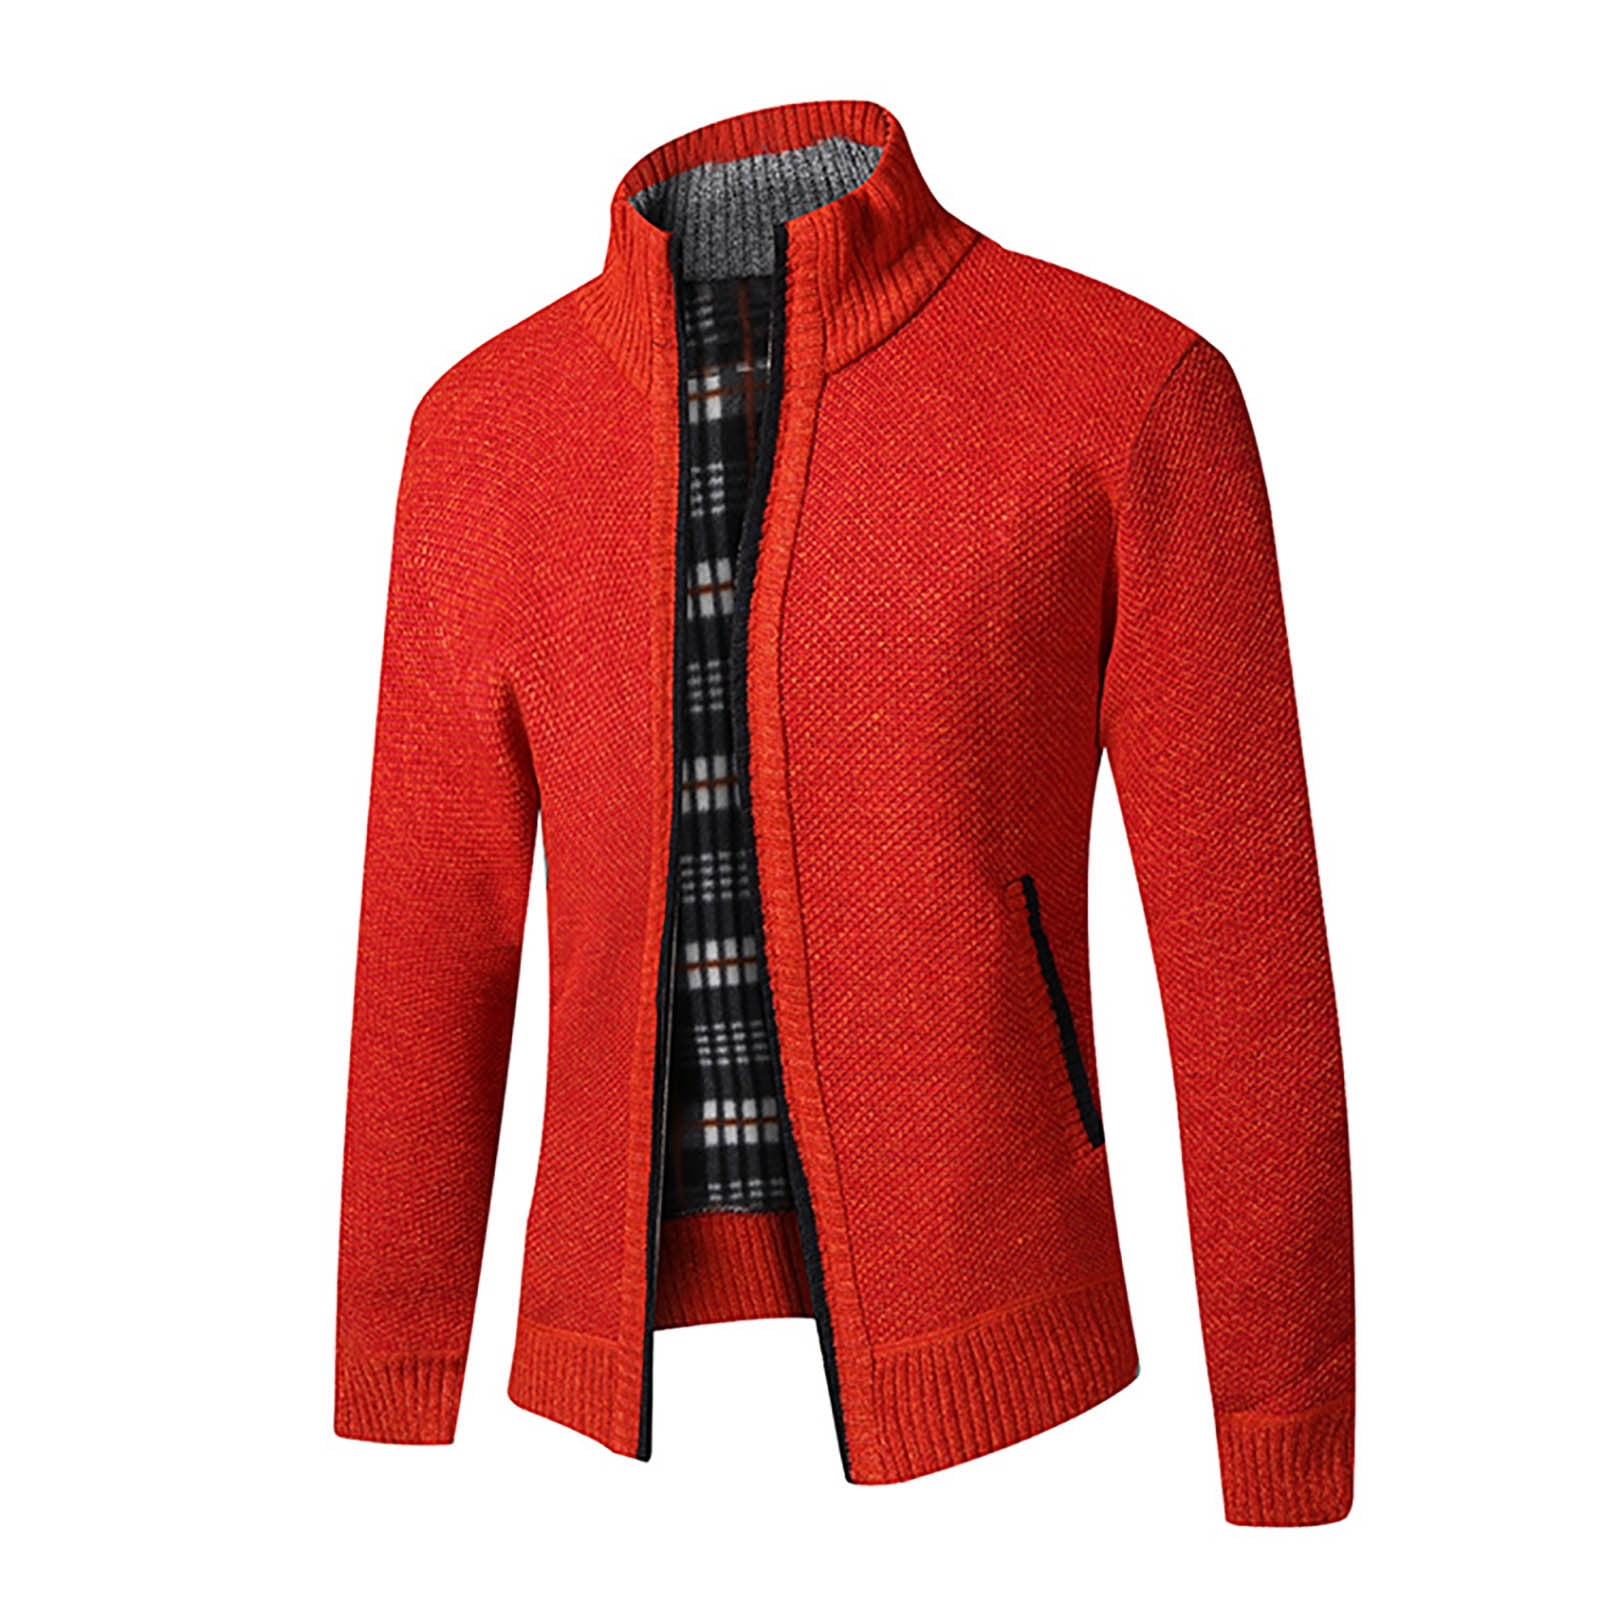 Roundtree & Yorke Red Crewneck Sweaters for Men